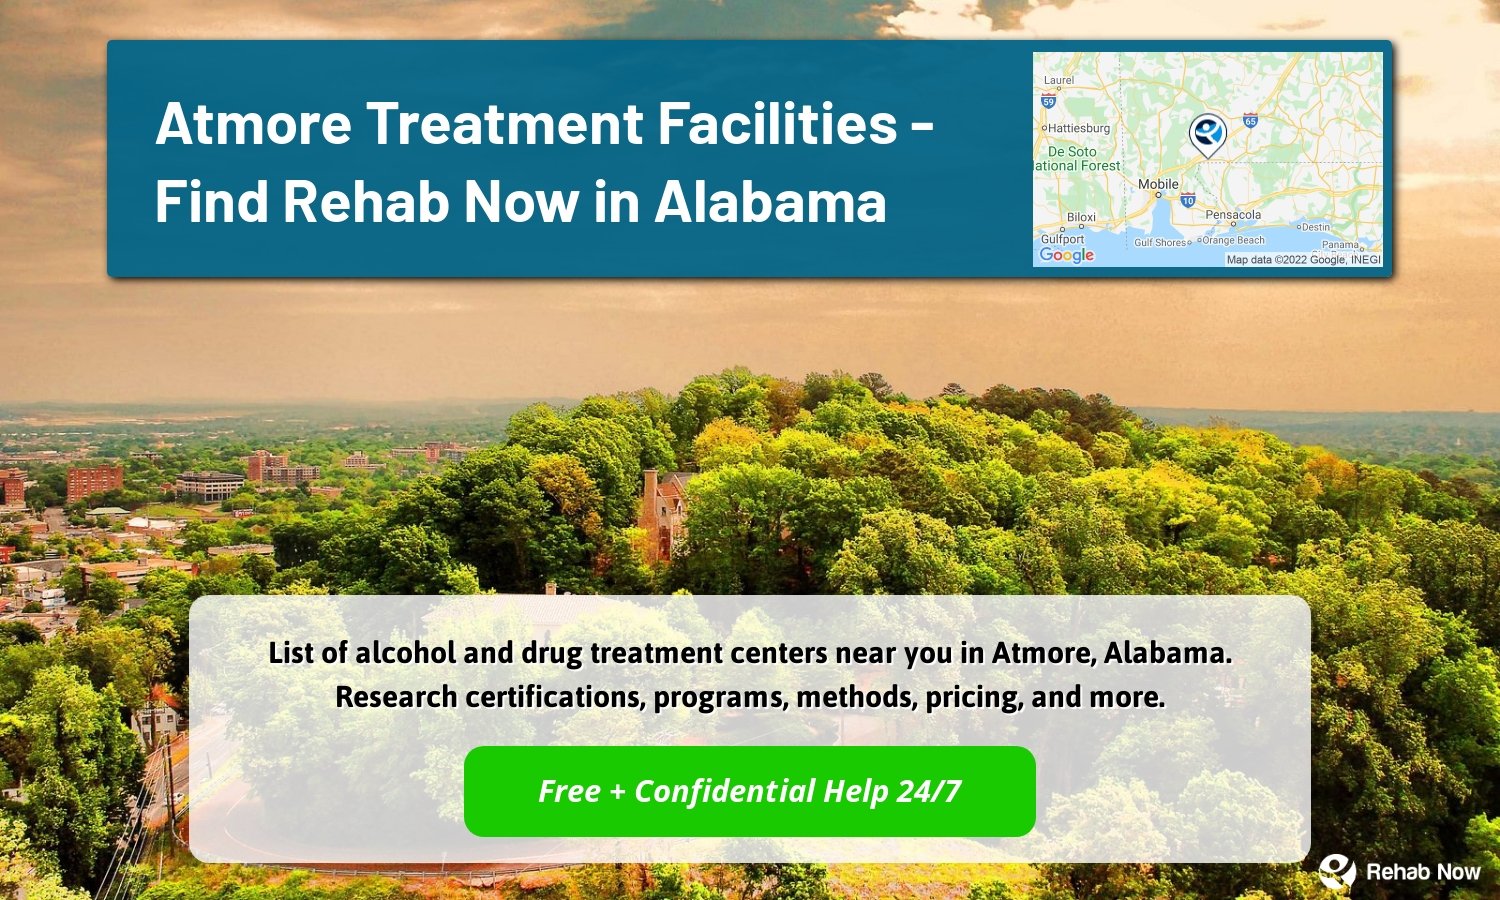 List of alcohol and drug treatment centers near you in Atmore, Alabama. Research certifications, programs, methods, pricing, and more.